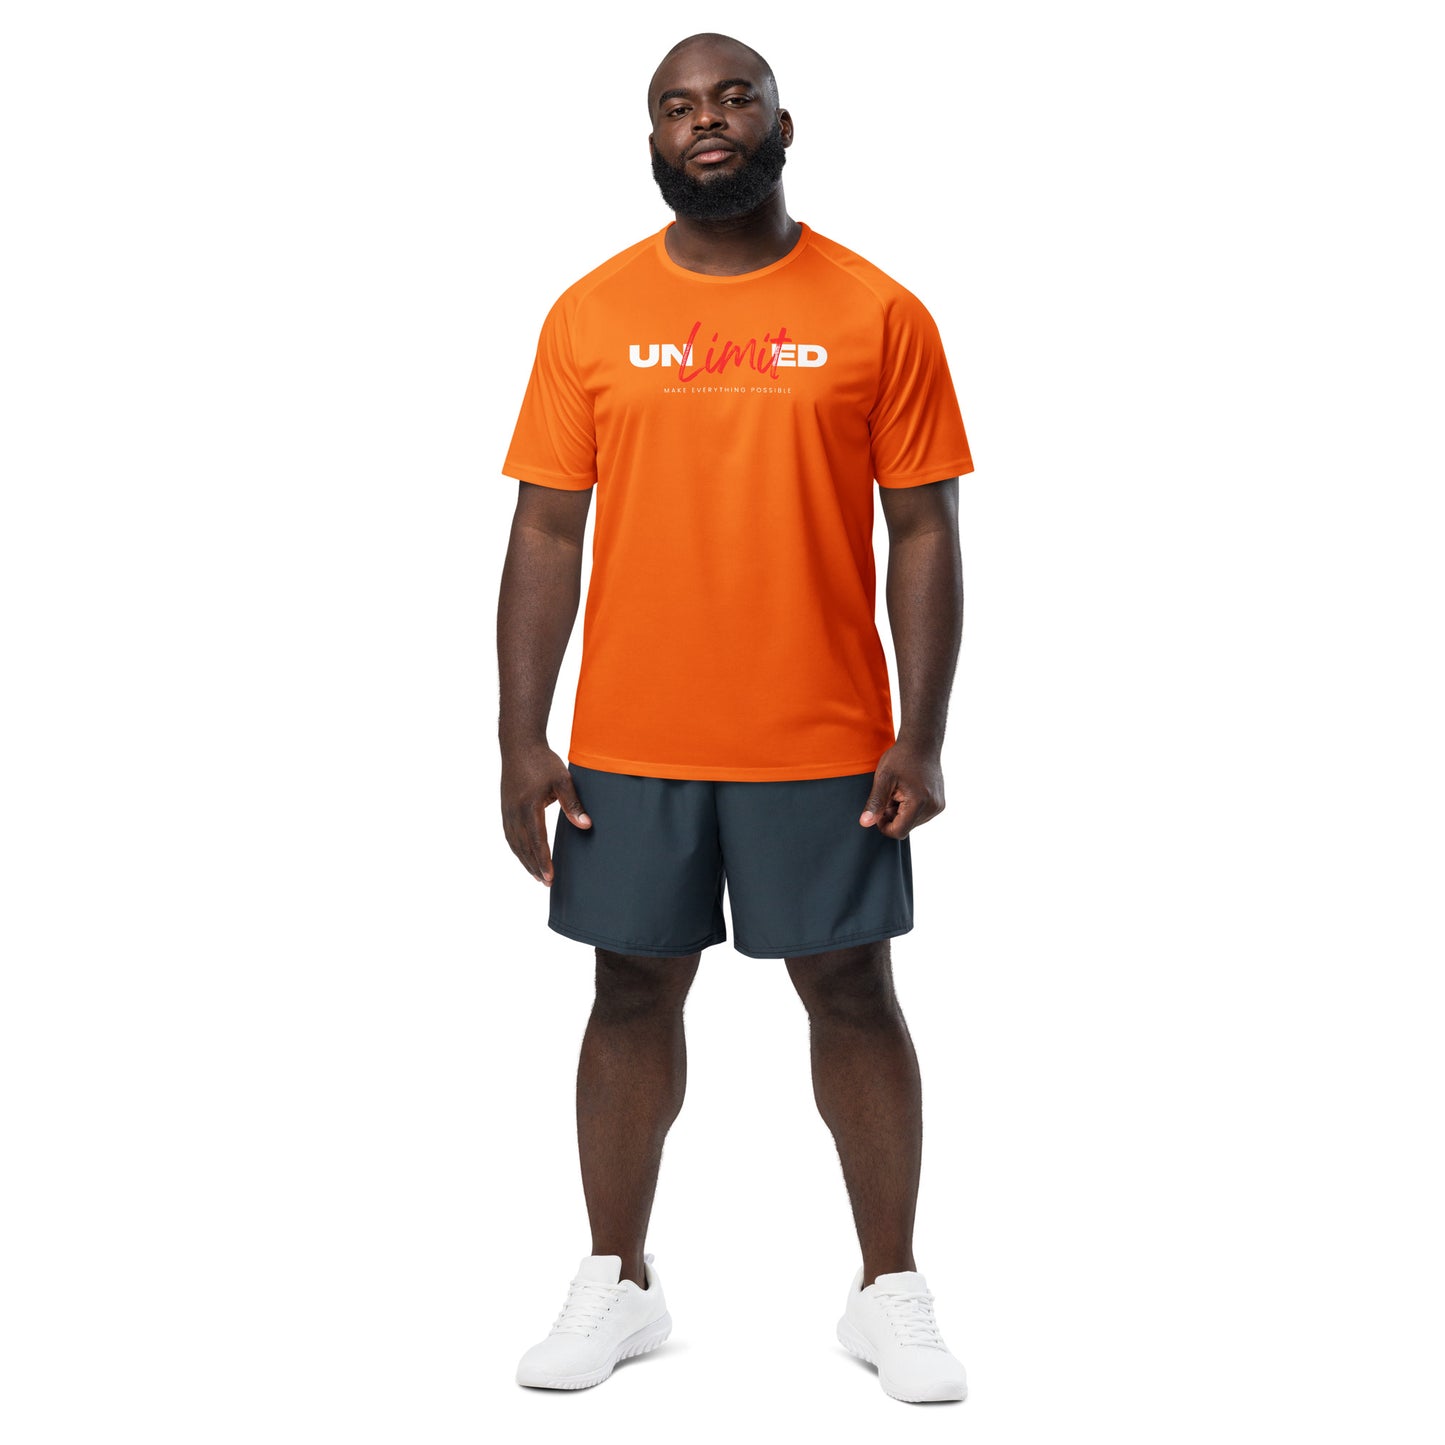 Unisex Unlimited make everything possible sports jersey